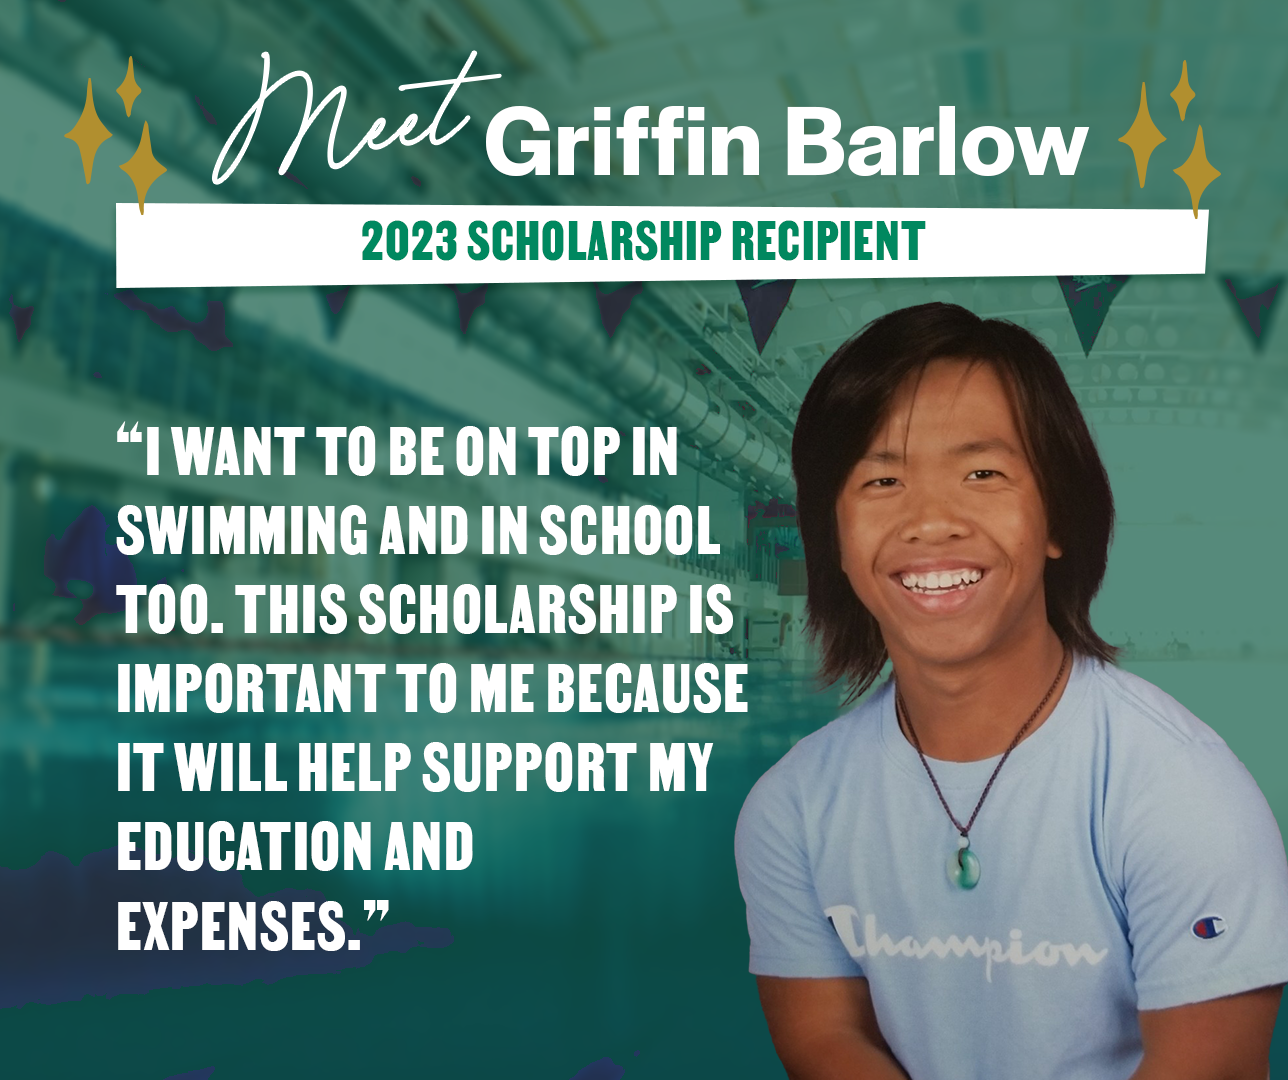 Meet Griffin Barlow: 2023 Scholarship Recipient 'I want to be on top in swimming and in school too. This scholarship is important to me because it will help support my education and expenses.'